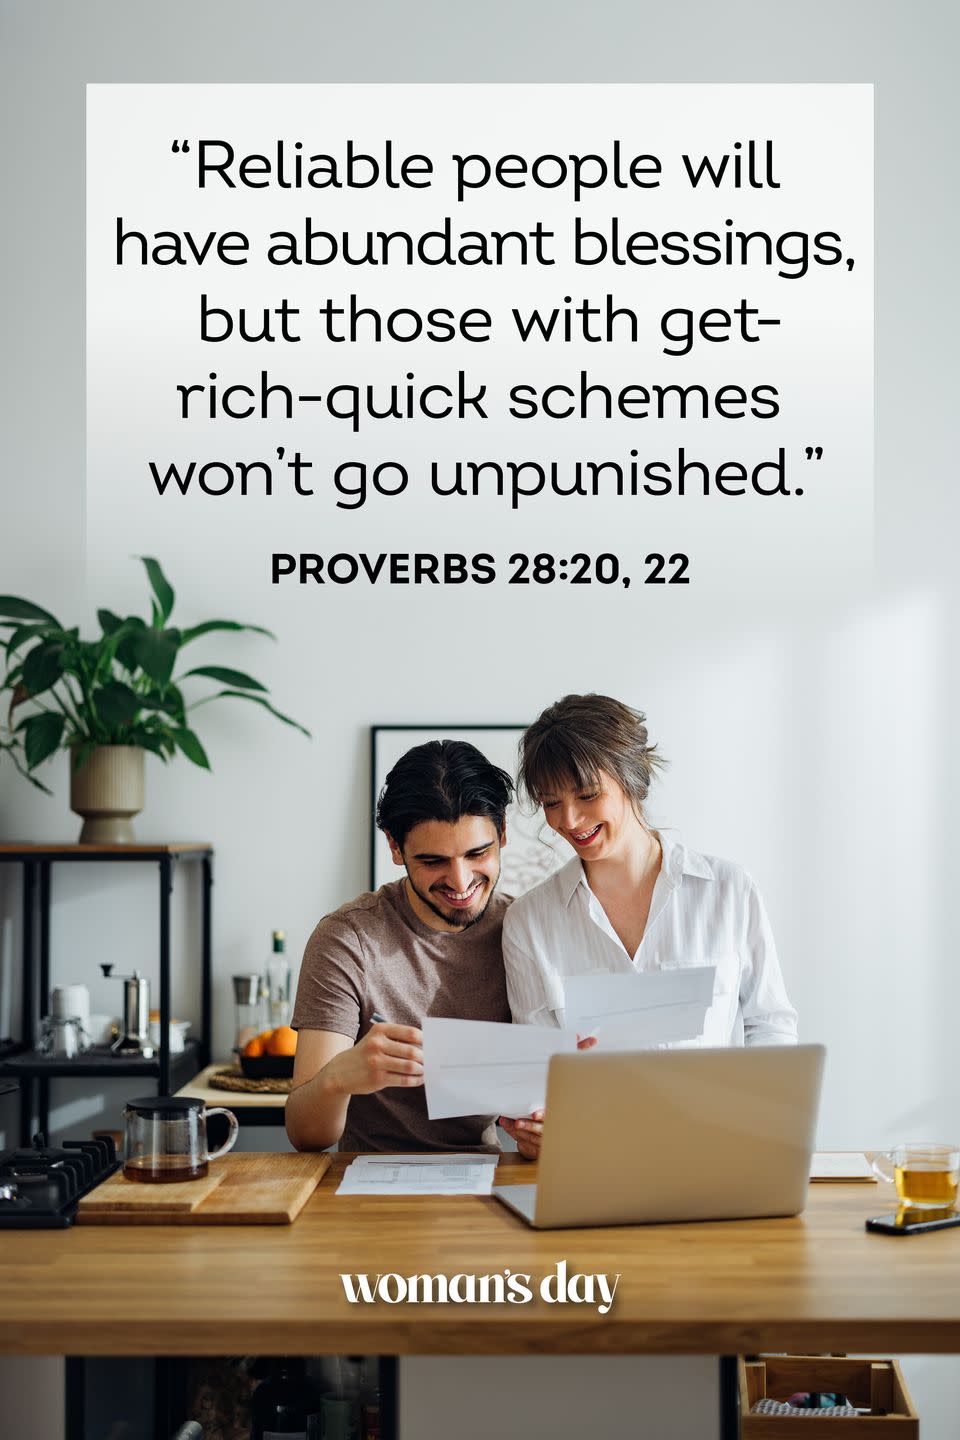 bible verses about money proverbs 28 20